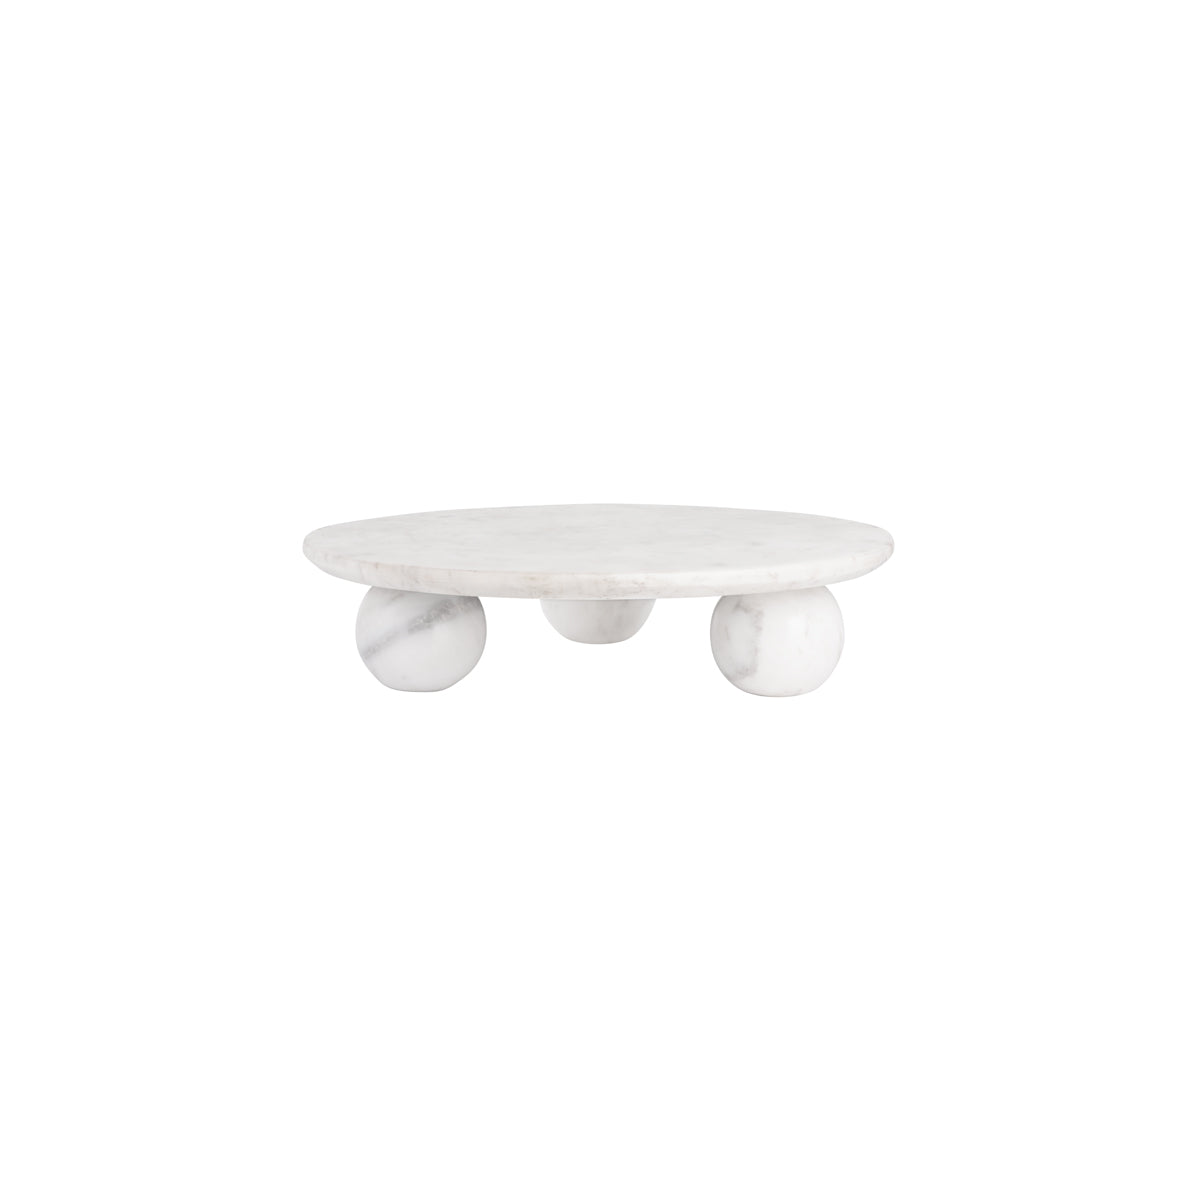 04724 Chef Inox Serve White Marble Round Board with Large Round Feet 350x85mm Tomkin Australia Hospitality Supplies